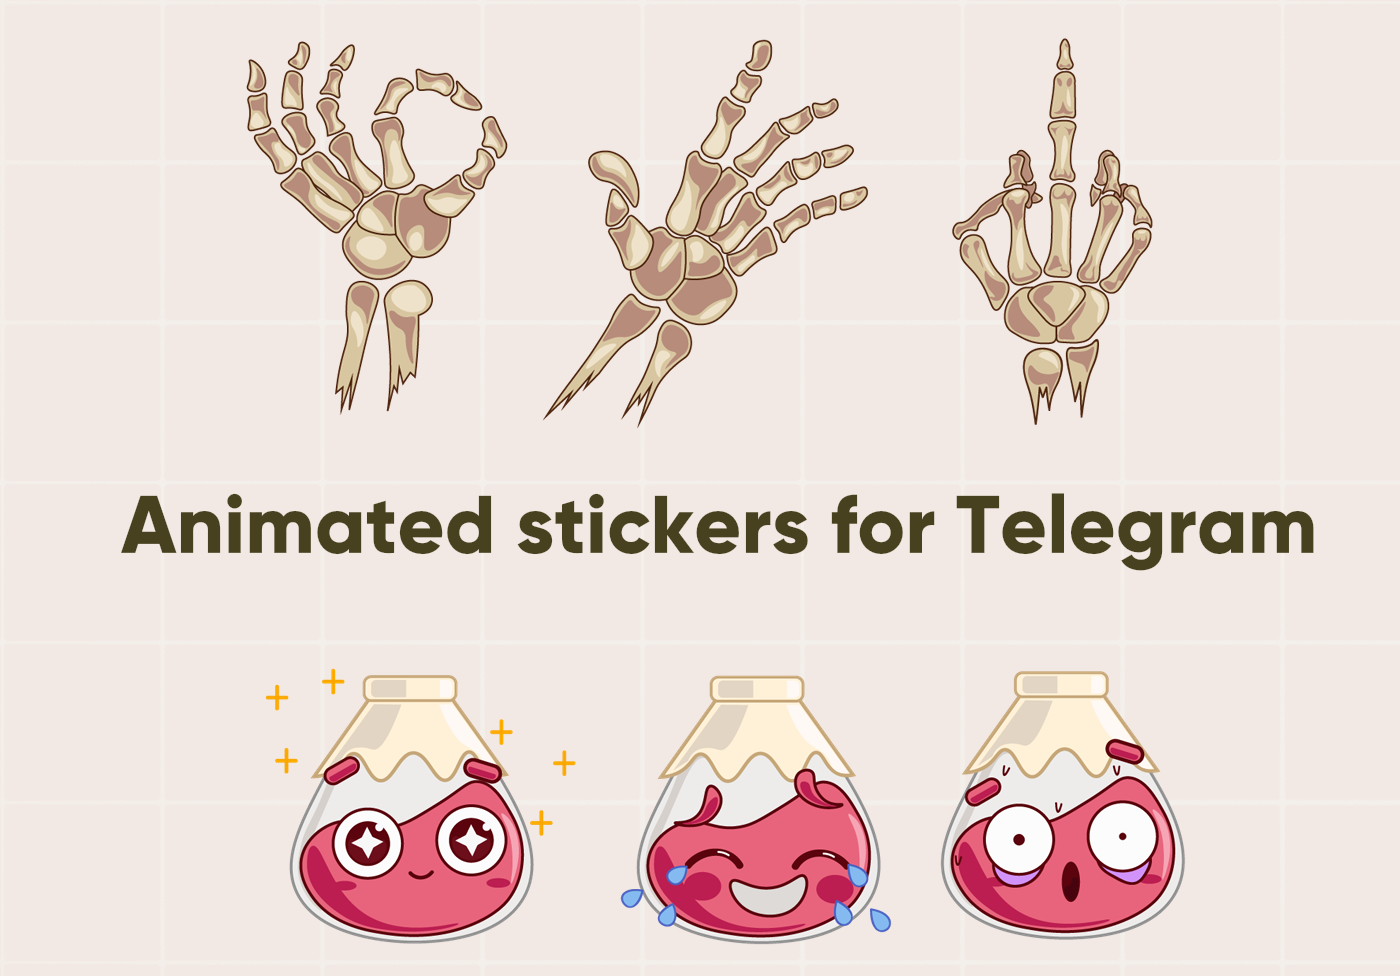 Animated stickers for Telegram on Behance